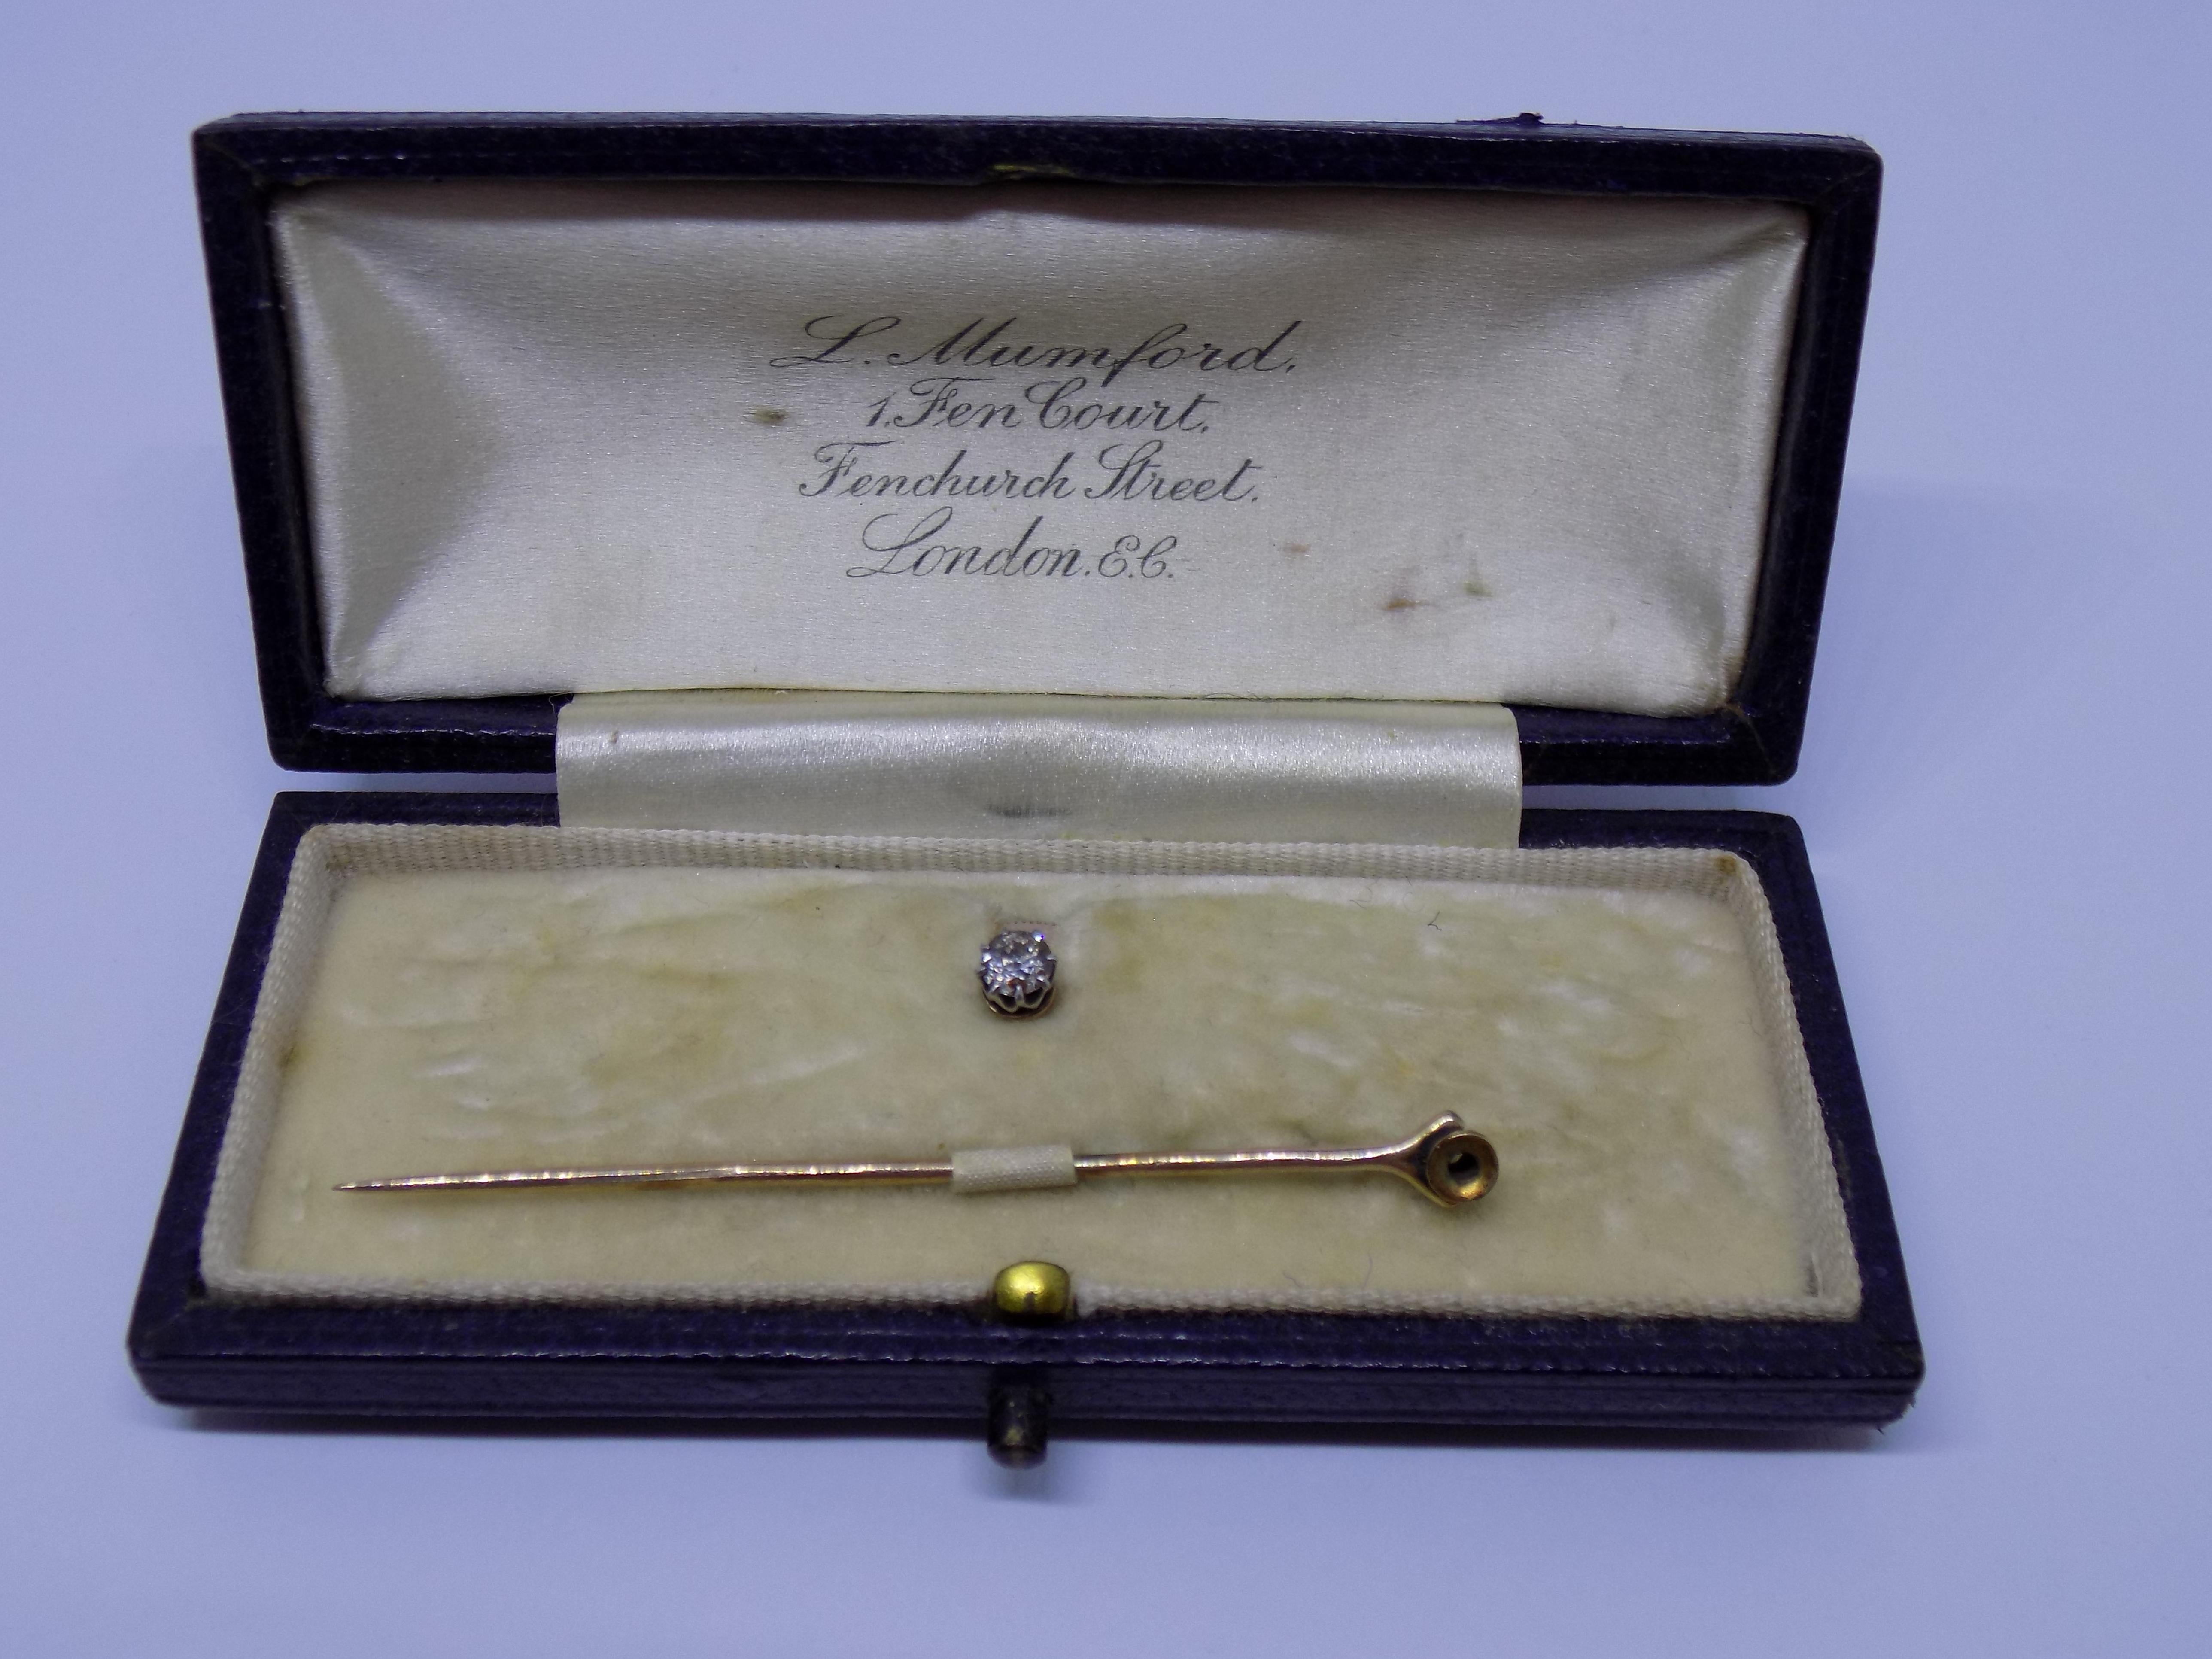 A fine quality antique Edwardian c.1900s 18 Karat Yellow Gold and 0.20 Carat Diamond stick pin / shirt stud. The pin will come in antique box as found. English origin.
Length 55mm.
Unmarked, tested 18 Karat Gold.